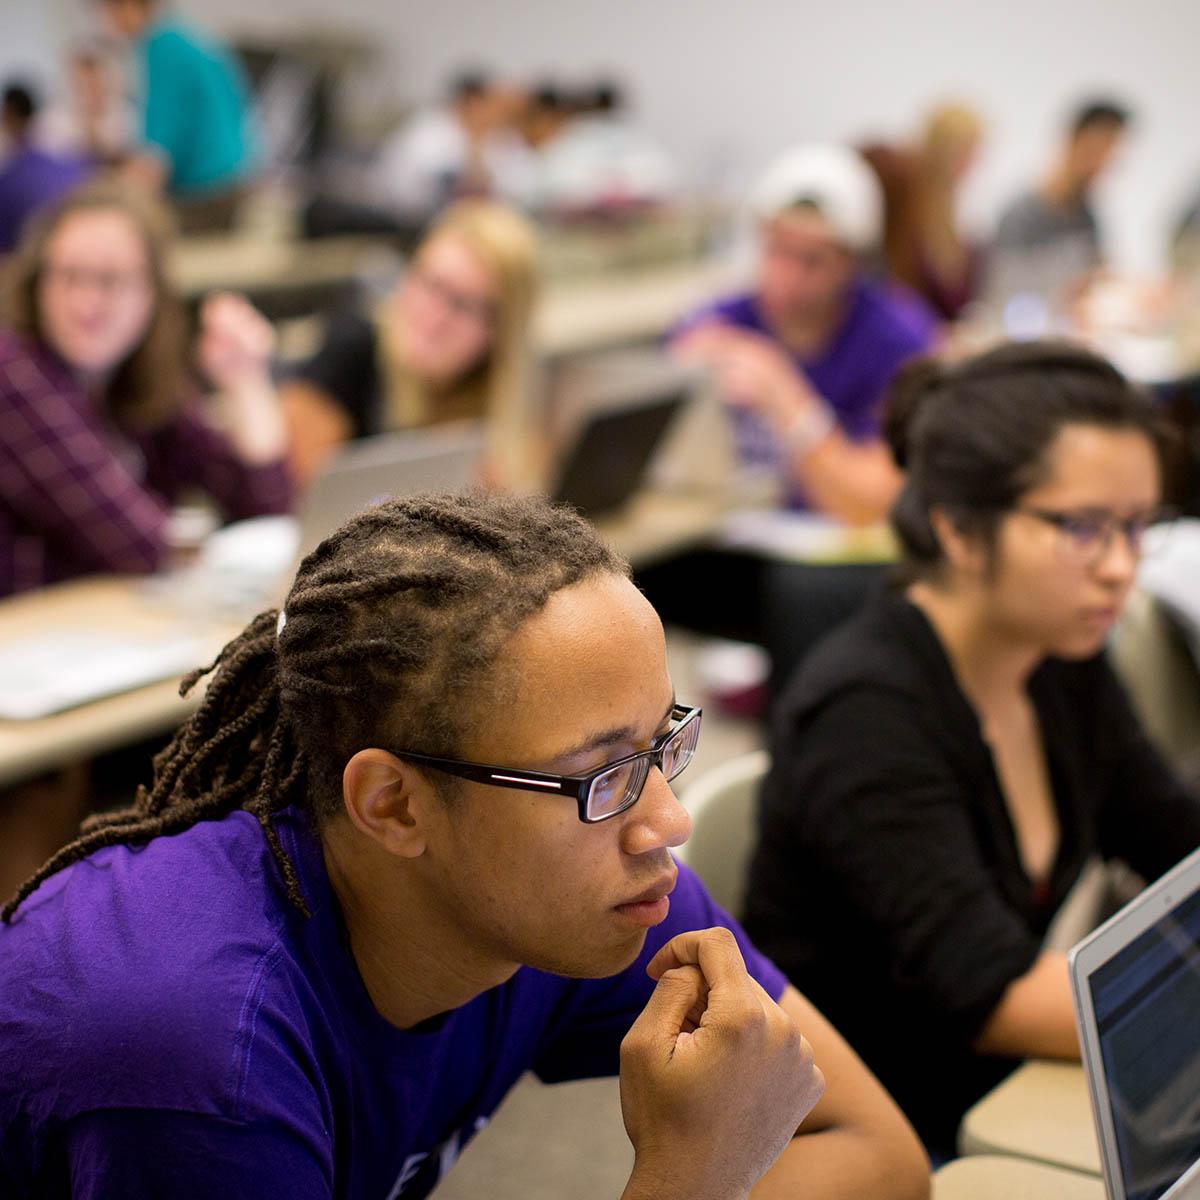 Photo of students listening in a classroom, with a young Black man with dreads, glasses, and a purple Chatham shirt in the foreground